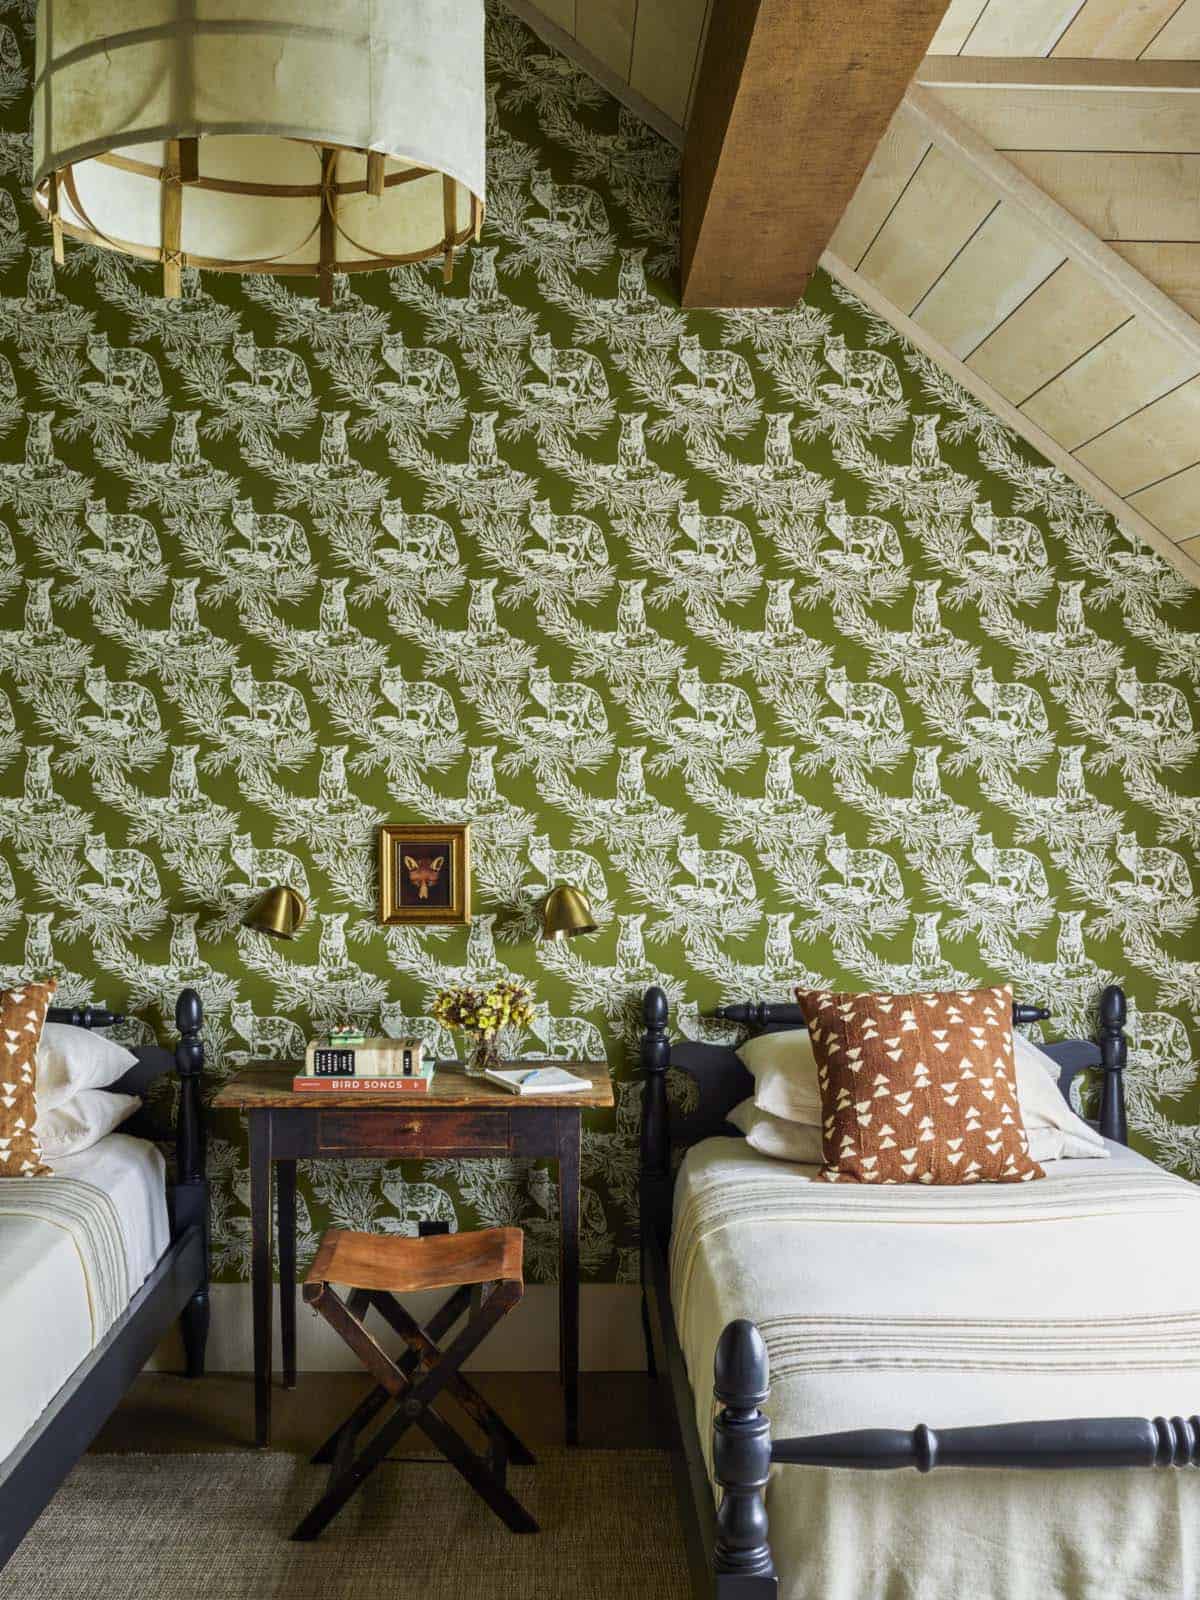 modern rustic bedroom with patterned green and white wallpaper